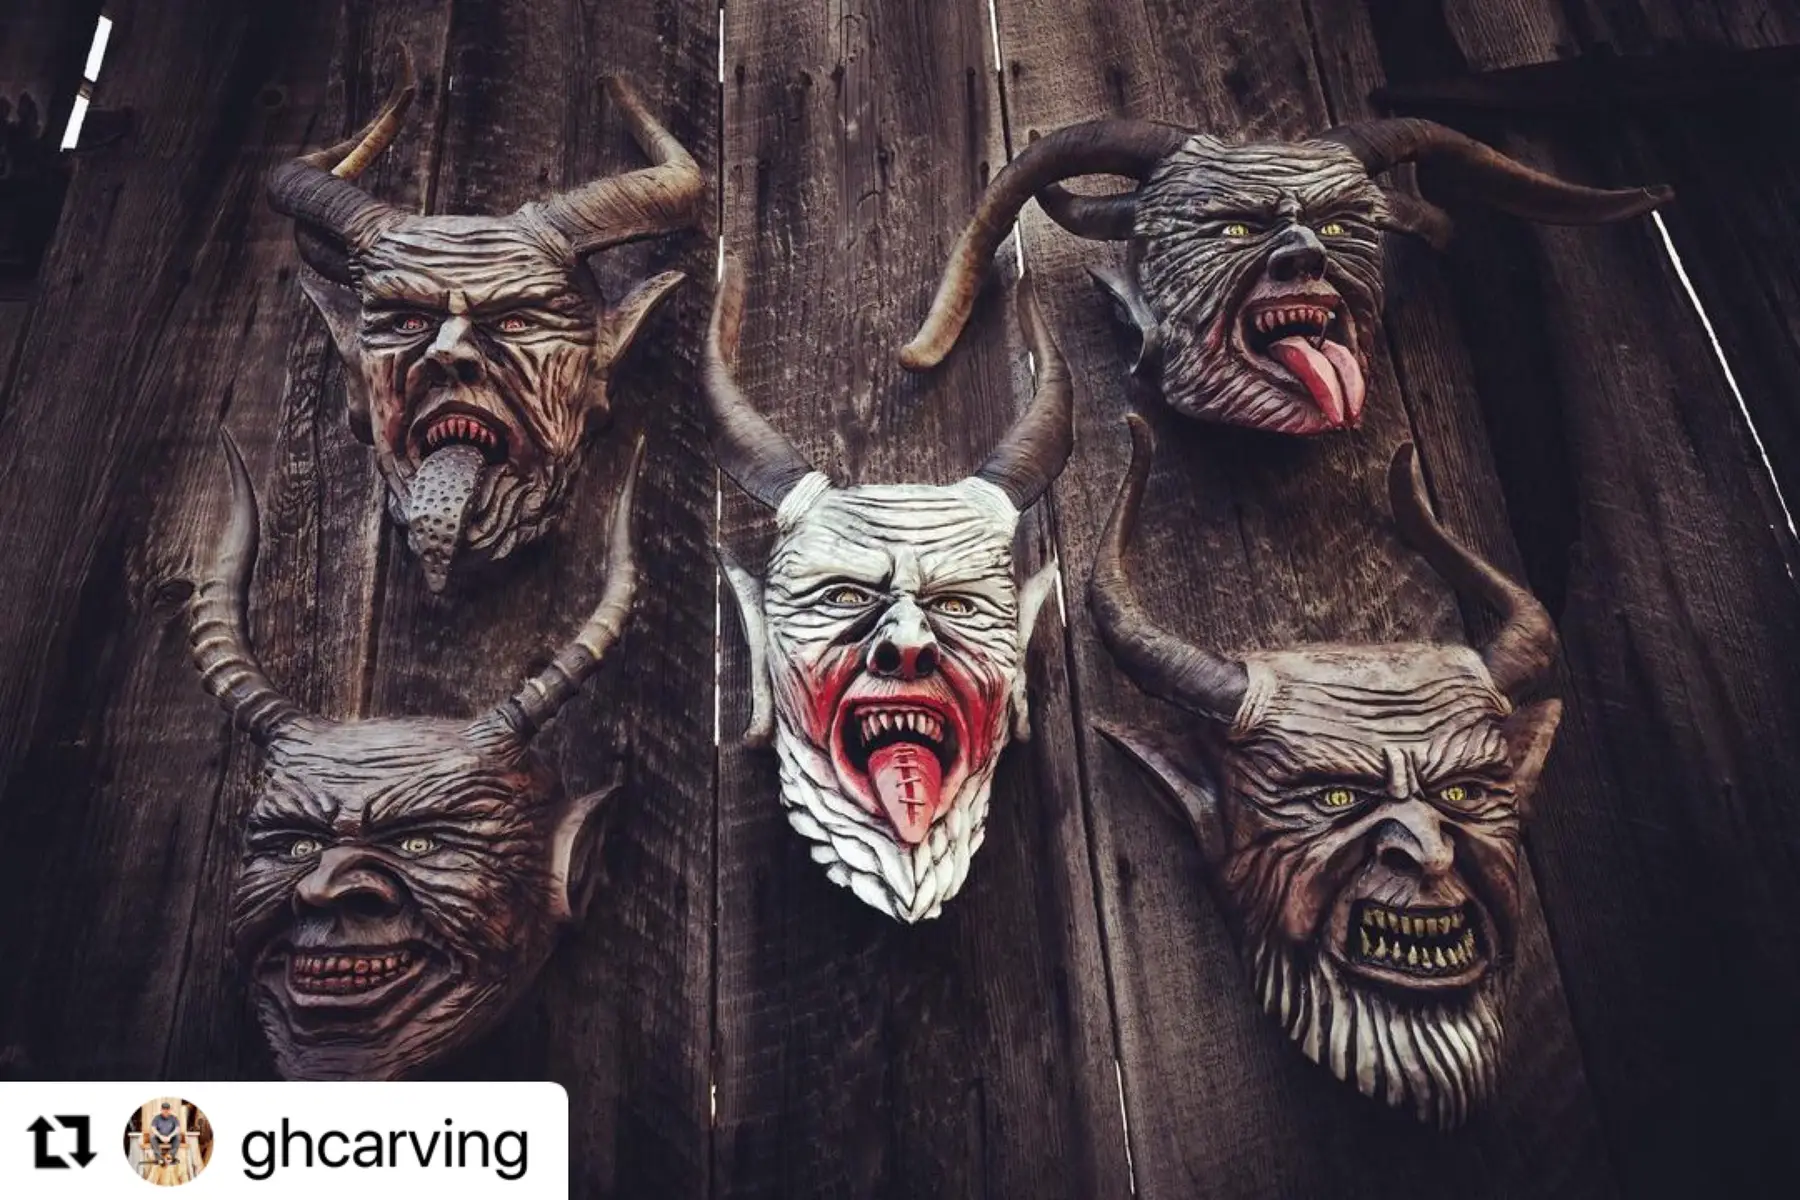 Today we are featuring the amazing work by @ghcarving  #mask #saburrtooth #saburrtoothtools 